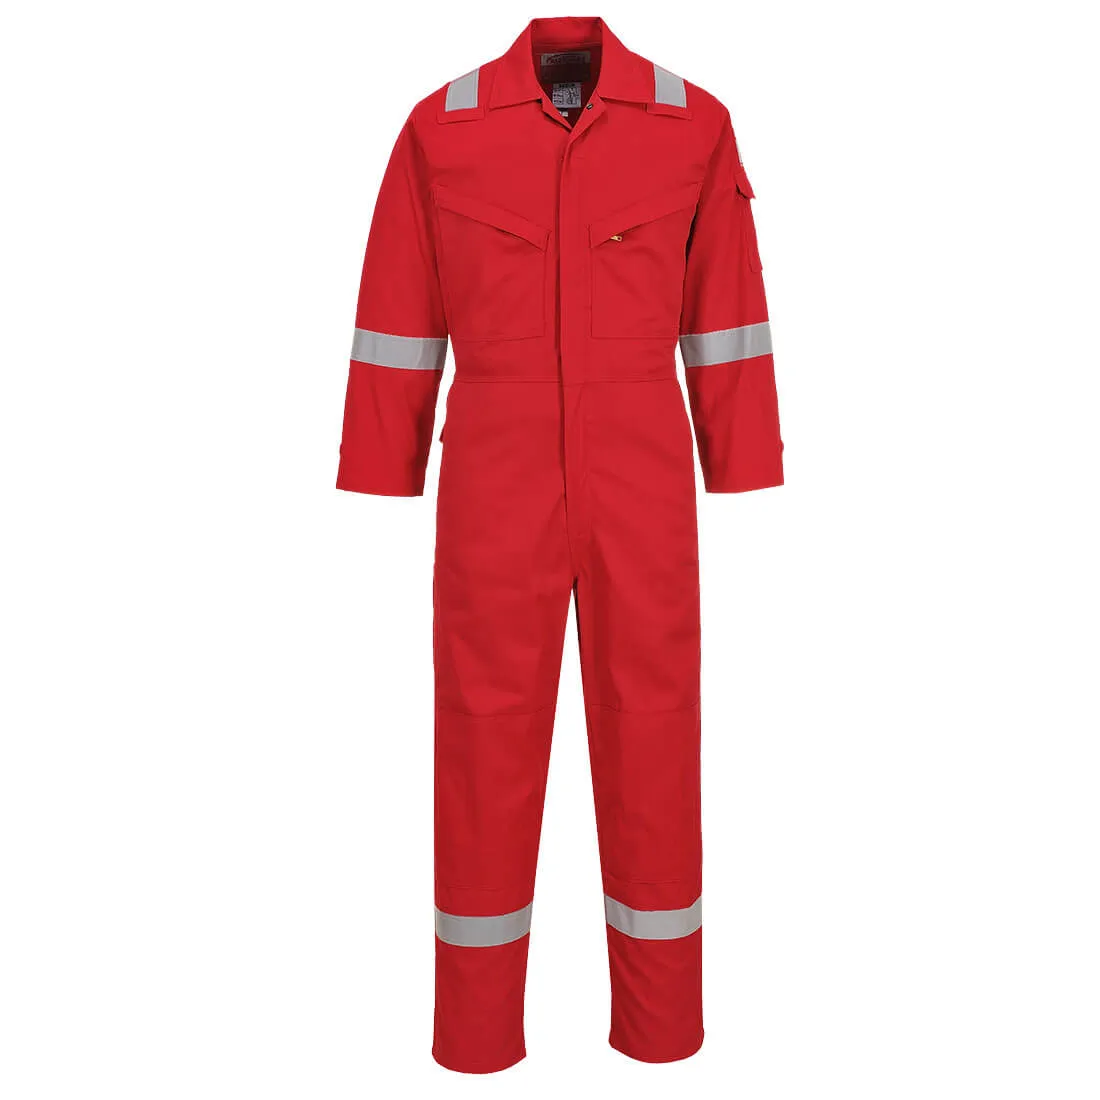 Biz Flame Mens Flame Resistant Lightweight Antistatic Coverall - Red, Small, 32"